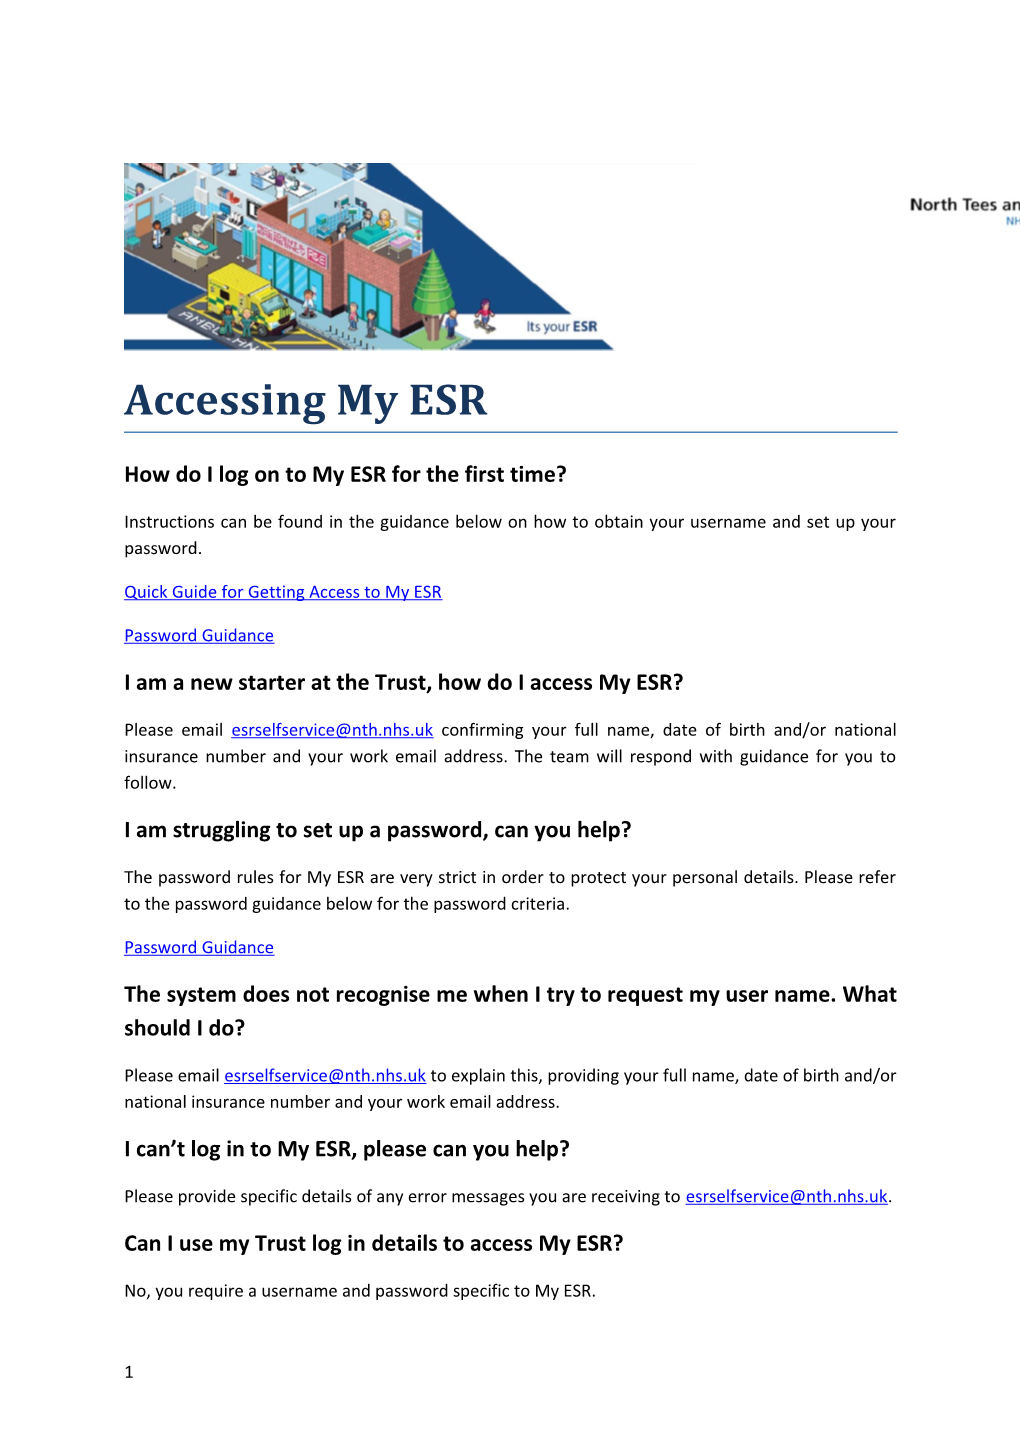 How Do I Log on to My ESR for the First Time?